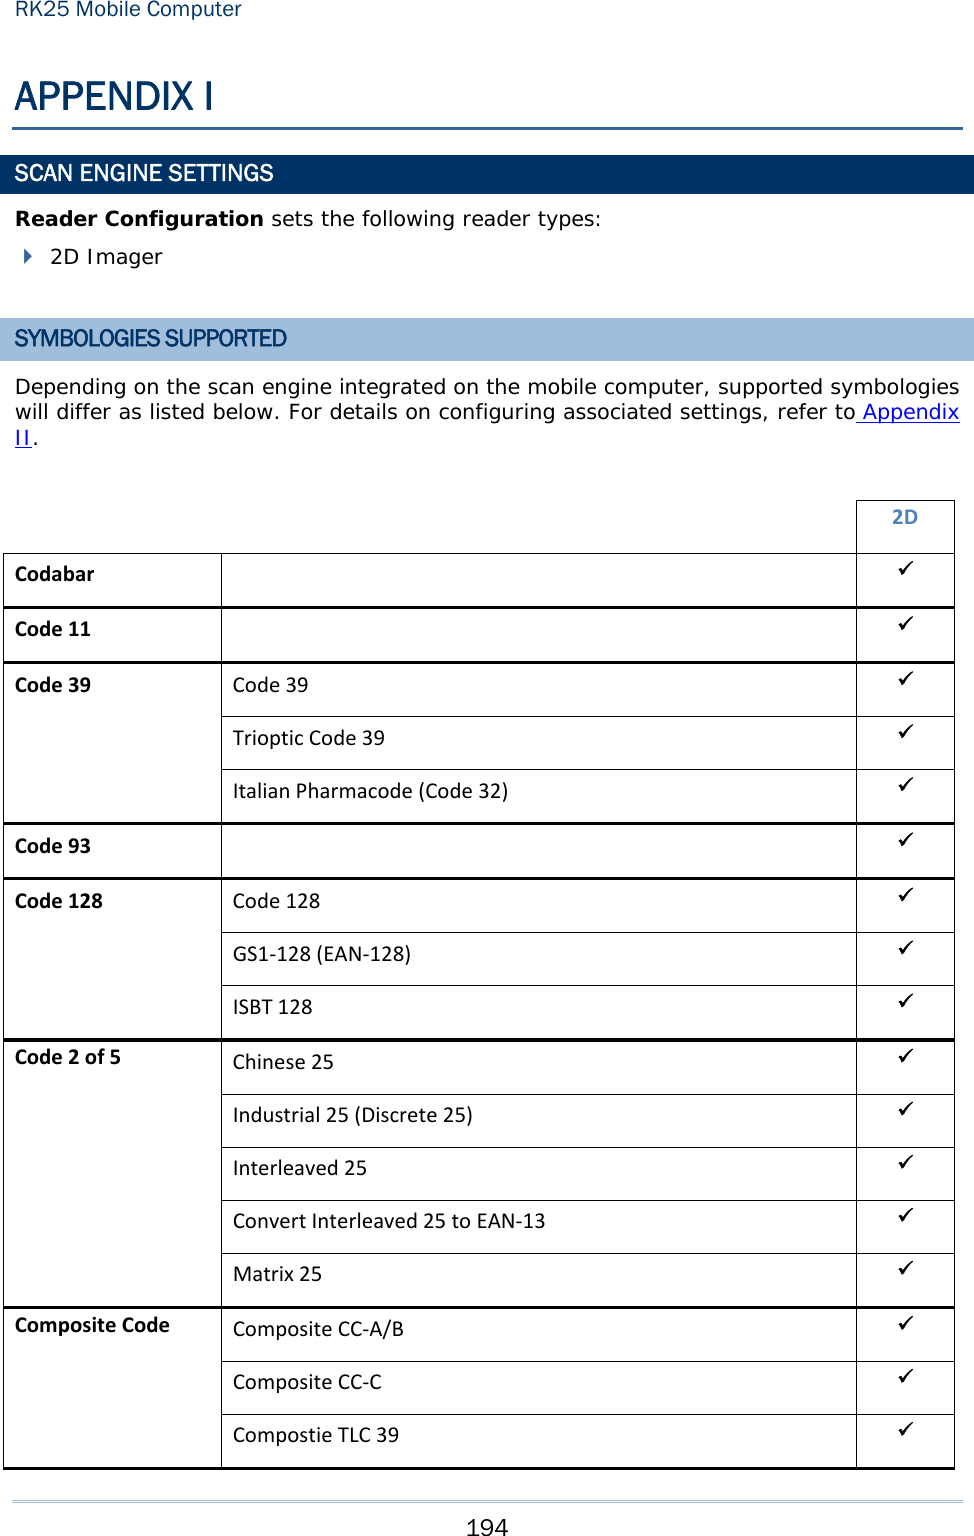 Page 98 of CipherLab RK25 Mobile Computer User Manual  2